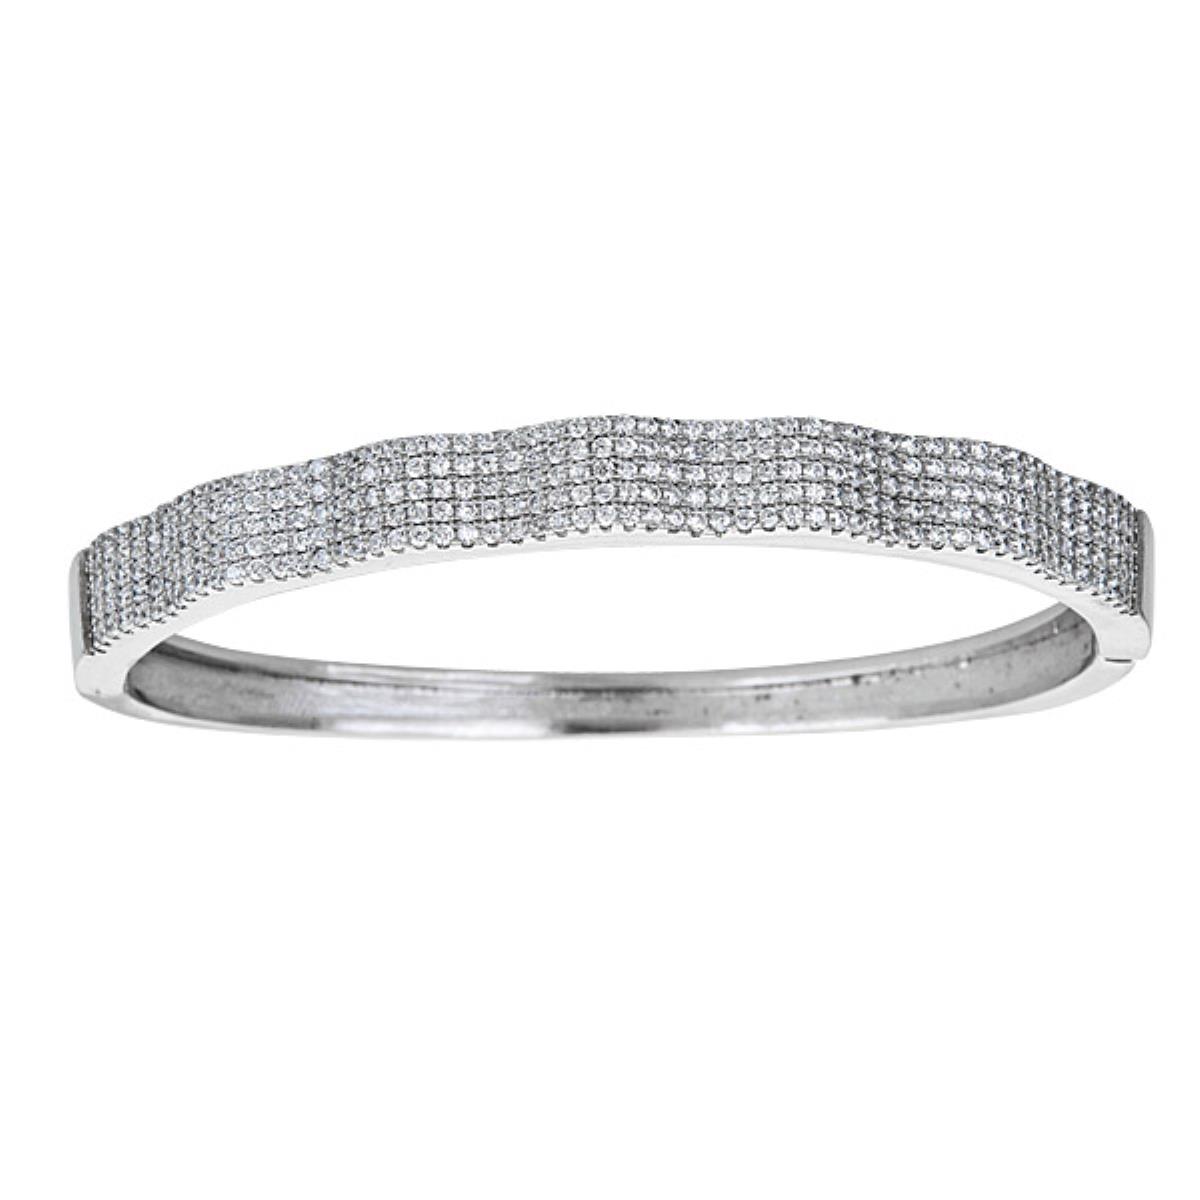 Sterling Silver Bumpy Pave Hinged Bangle